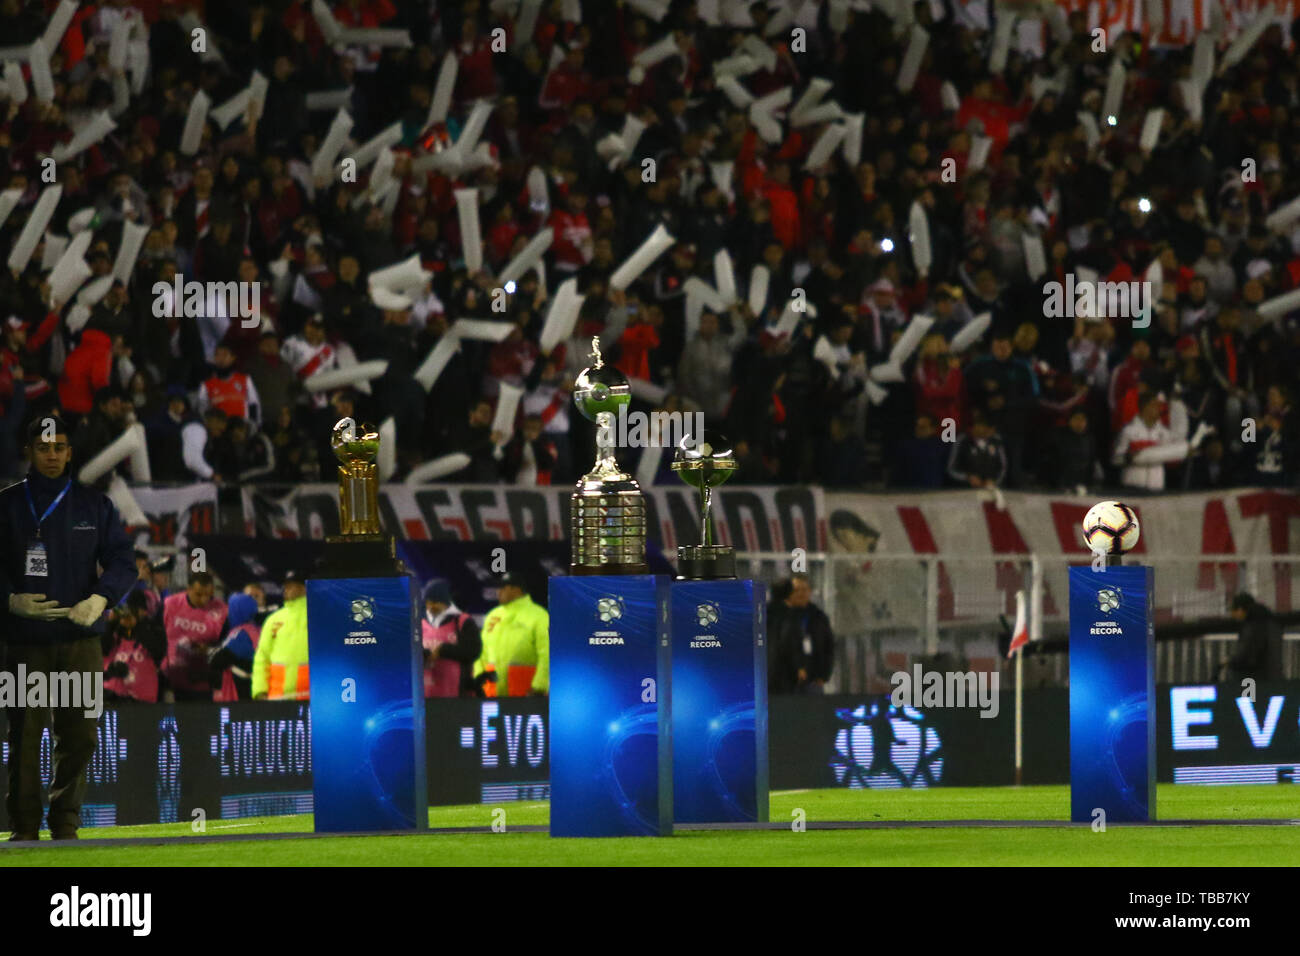 BUENOS AIRES, 30.05.2019:  Trophys of Conmebol are exhibited before the match between River Plate (ARG) and Athletico Paranaense (BRA) for final match Stock Photo